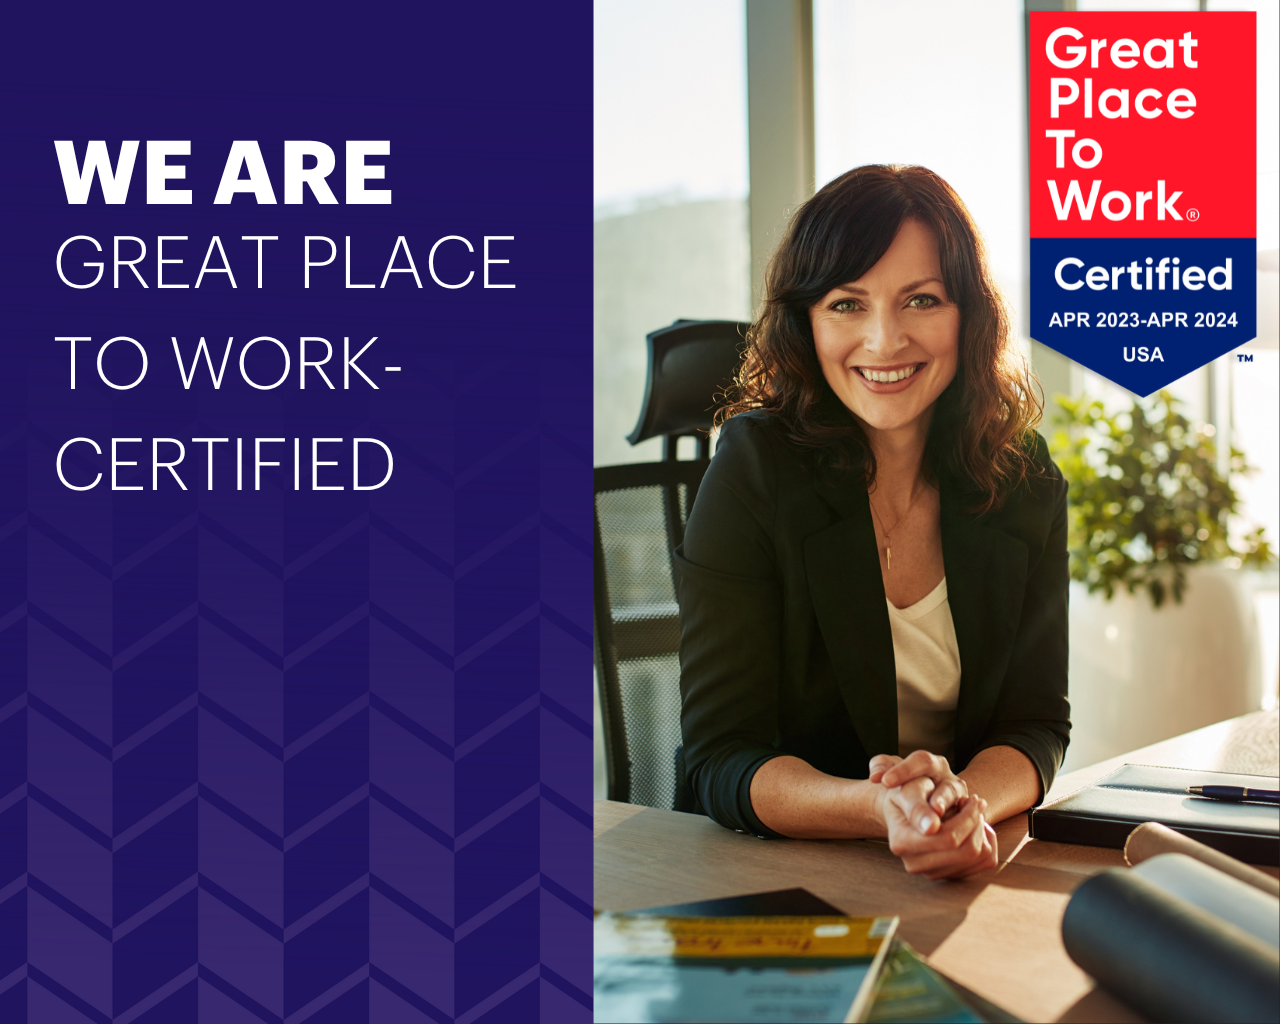 We Are Great Place to Work Certified